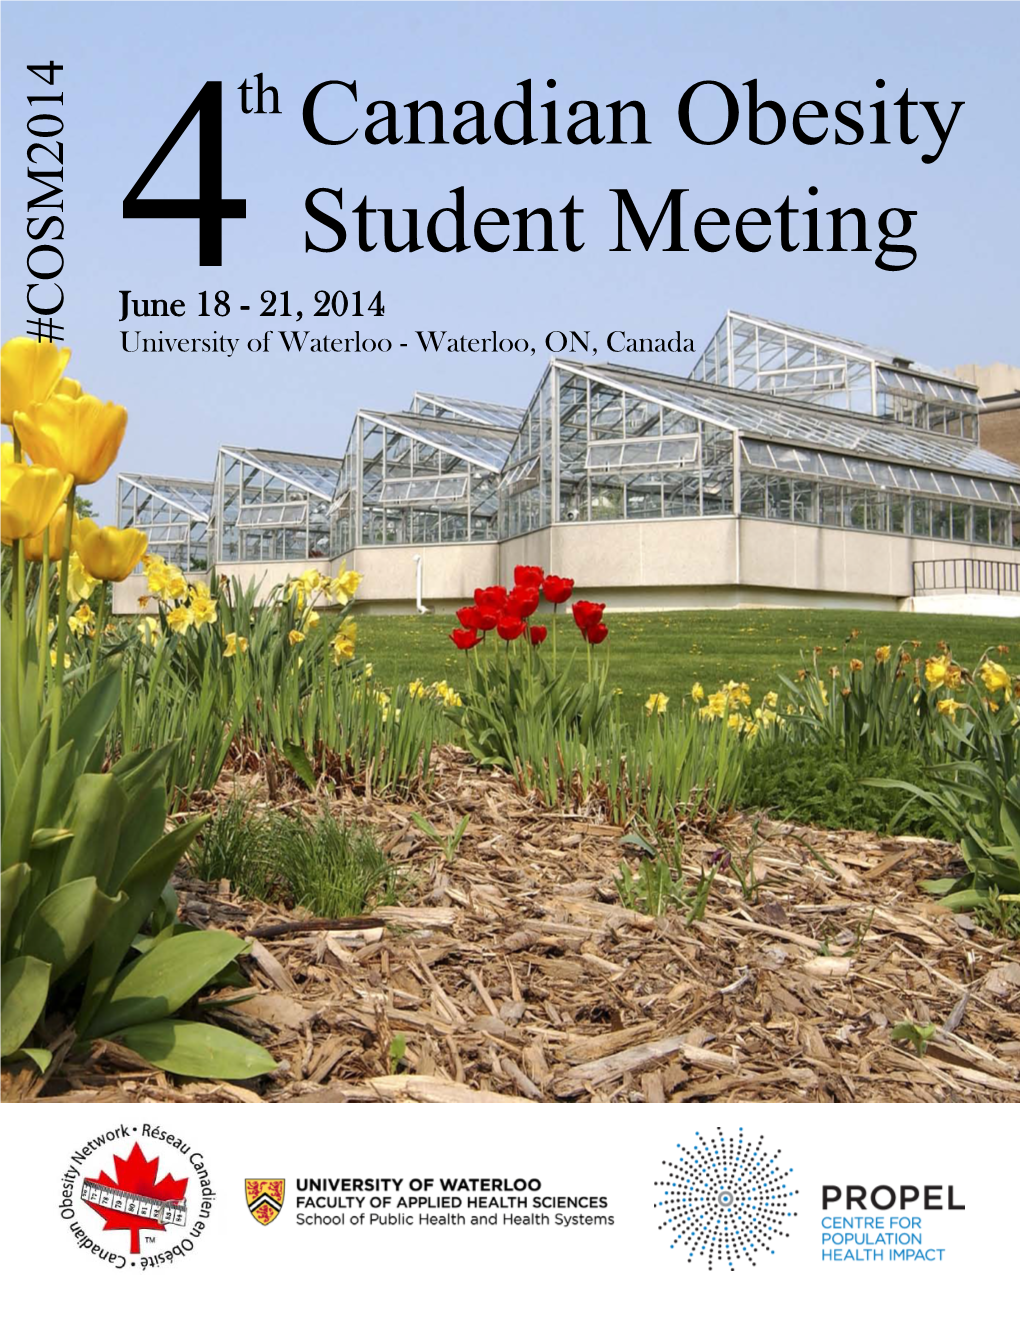 Canadian Obesity Student Meeting June 18 - 21, 2014